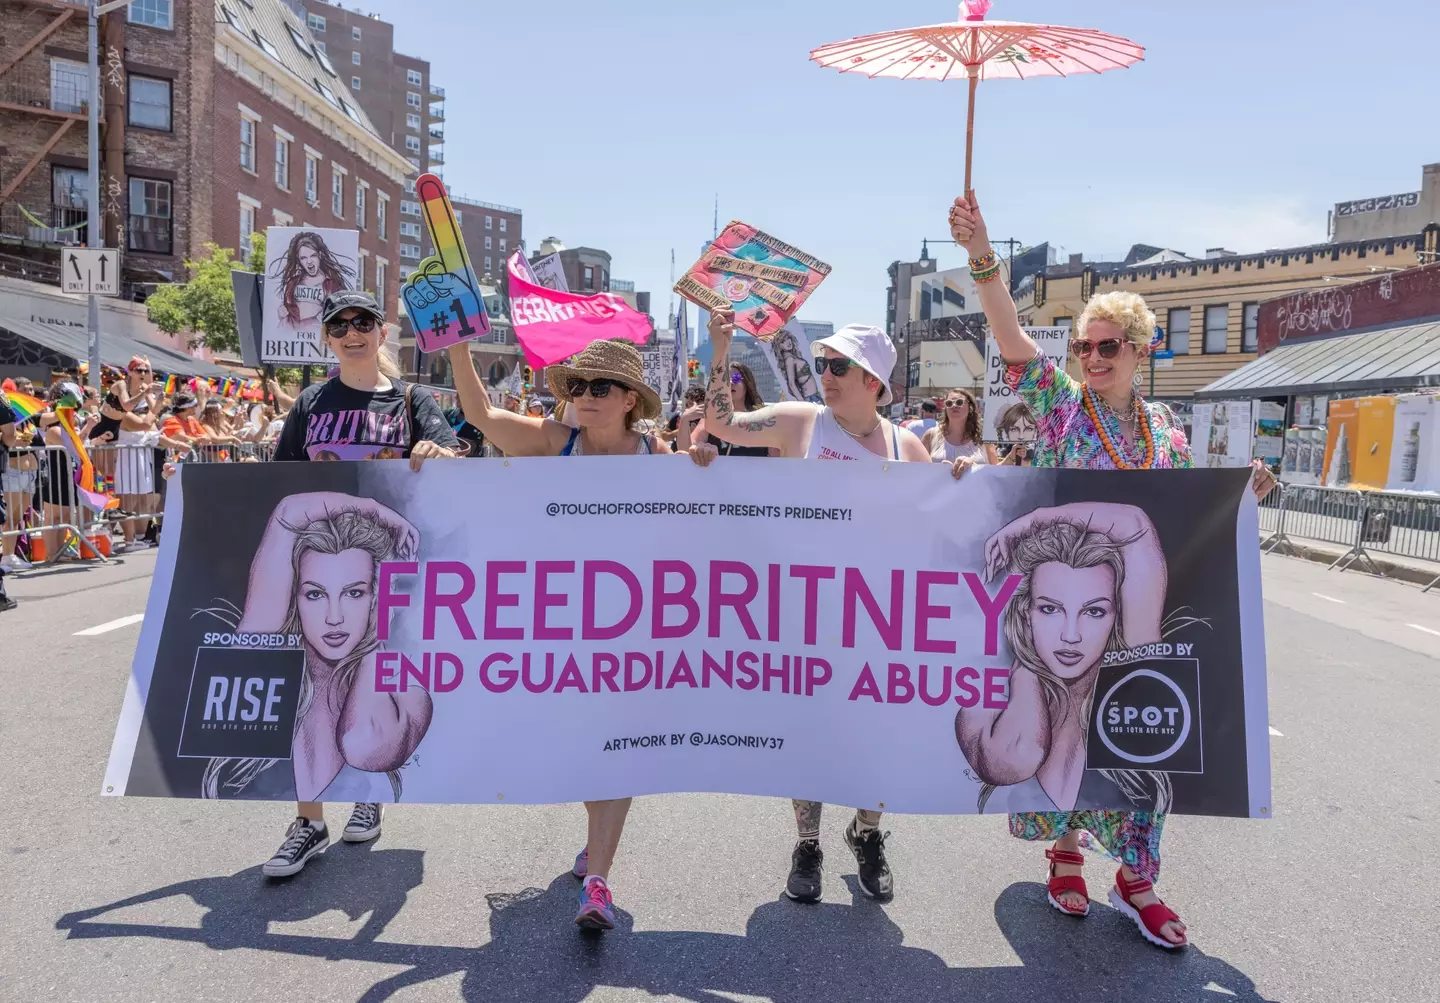 Fans started a campaign to 'free' Britney from her conservatorship, which was successful in 2021.